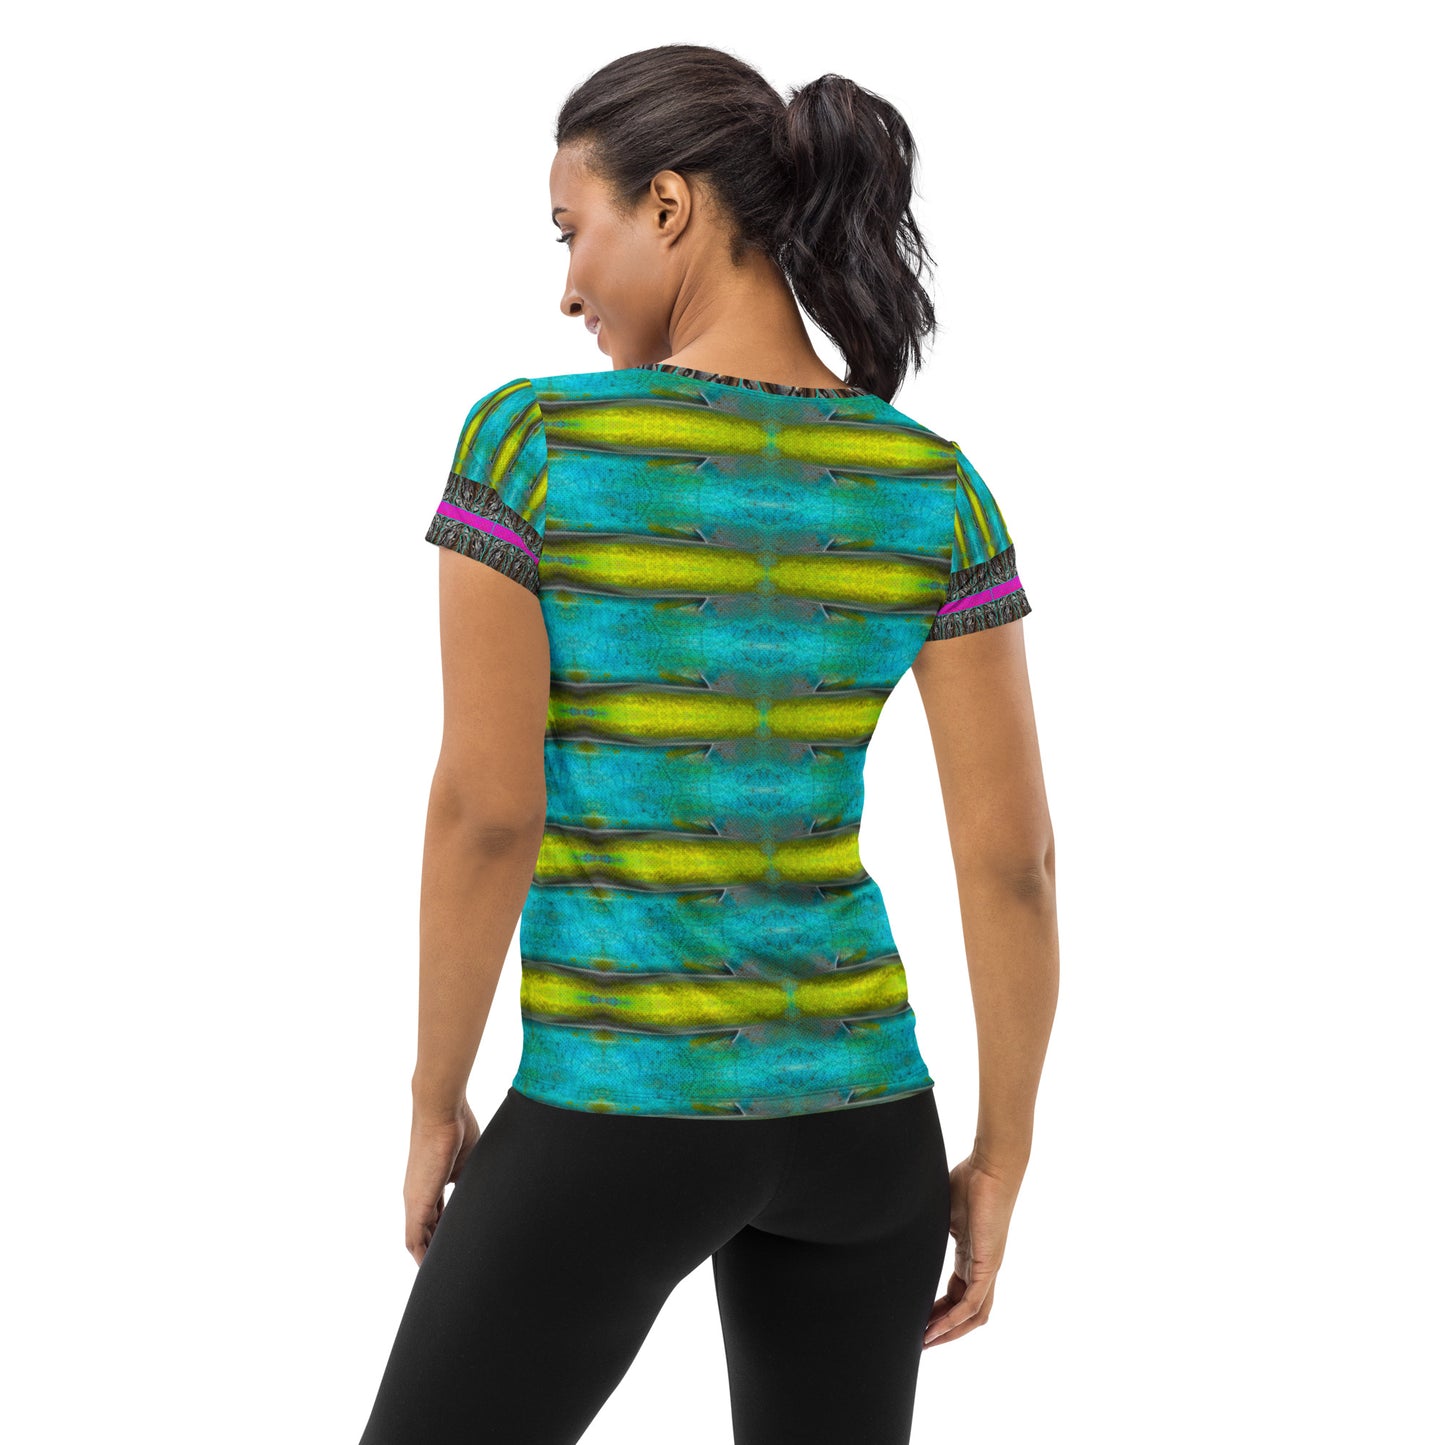 Athletic T-Shirt (Her/They)(Tree Link Stripe) RJSTH@Fabric#8 RJSTHS2021 RJS